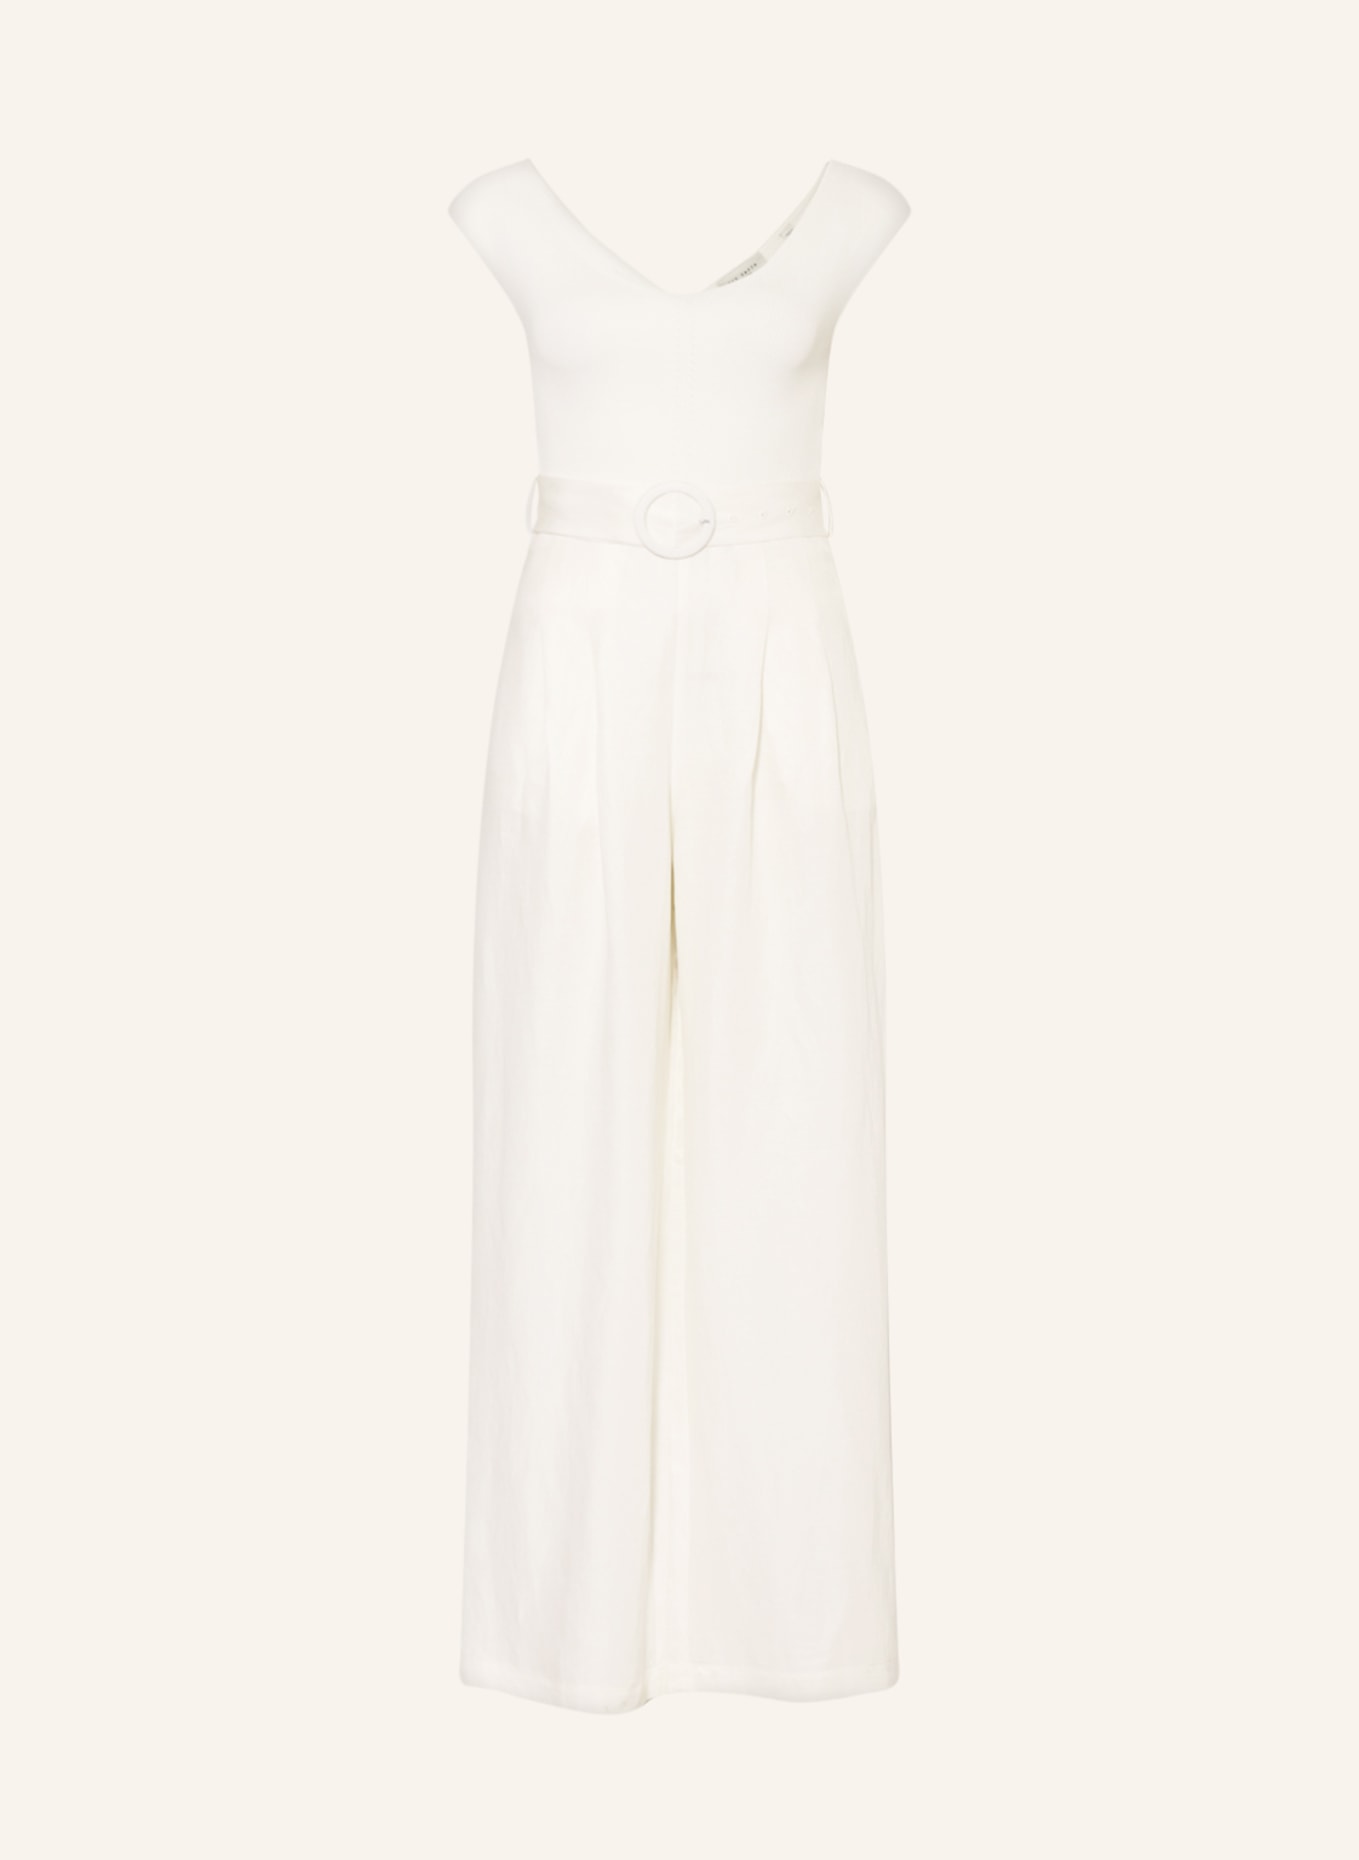 TED BAKER Jumpsuit TABBIAA in mixed materials in white Breuninger